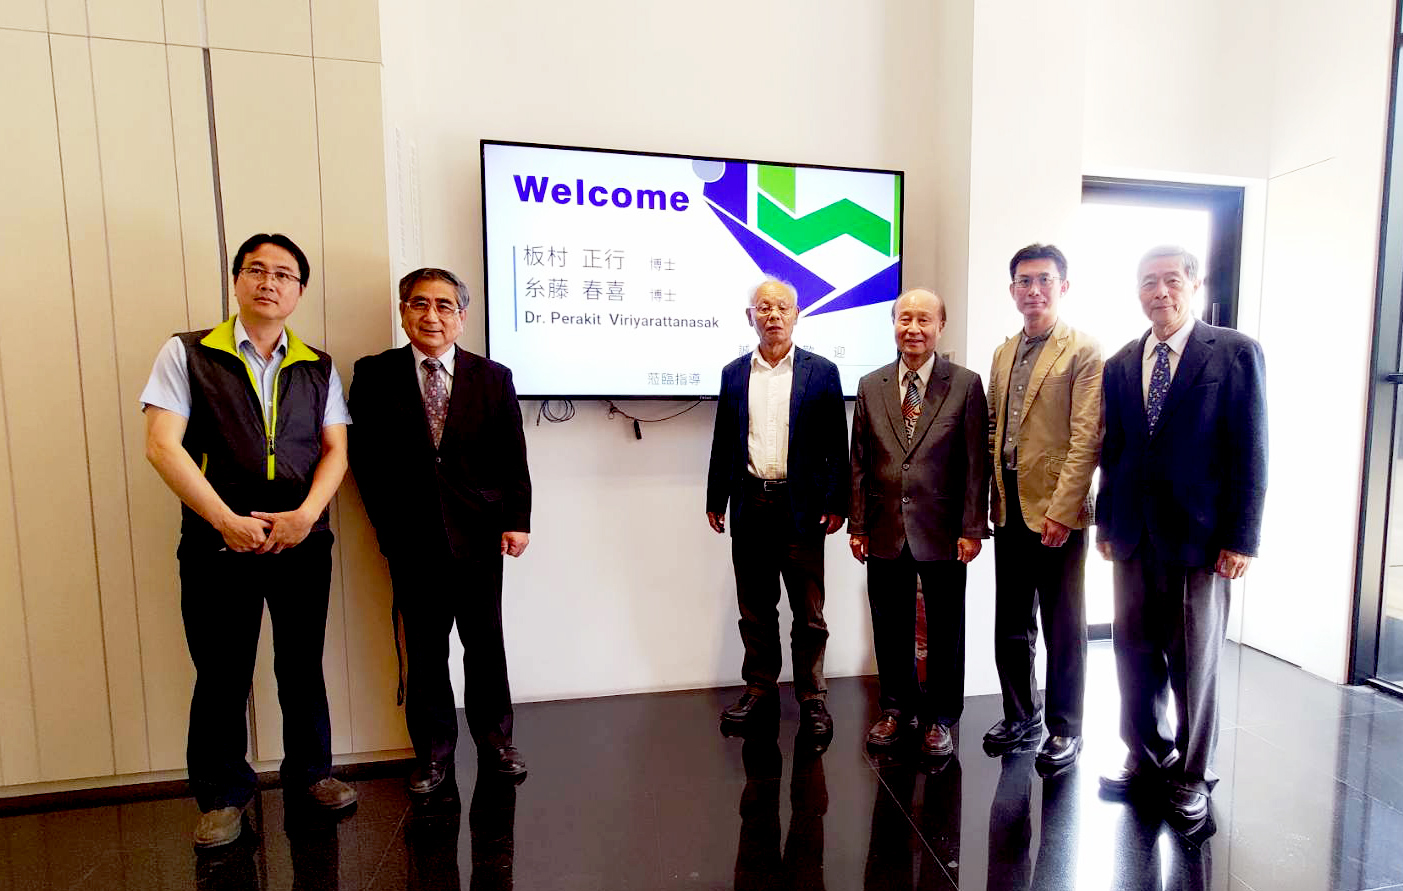 Experts from Japan, Thailand, and Taiwan gathered together to participate in a seminar on the latest casting technology trends. On the next day, the experts went to WKPT for a corporate visit and provided valuable suggestions on casting process development.